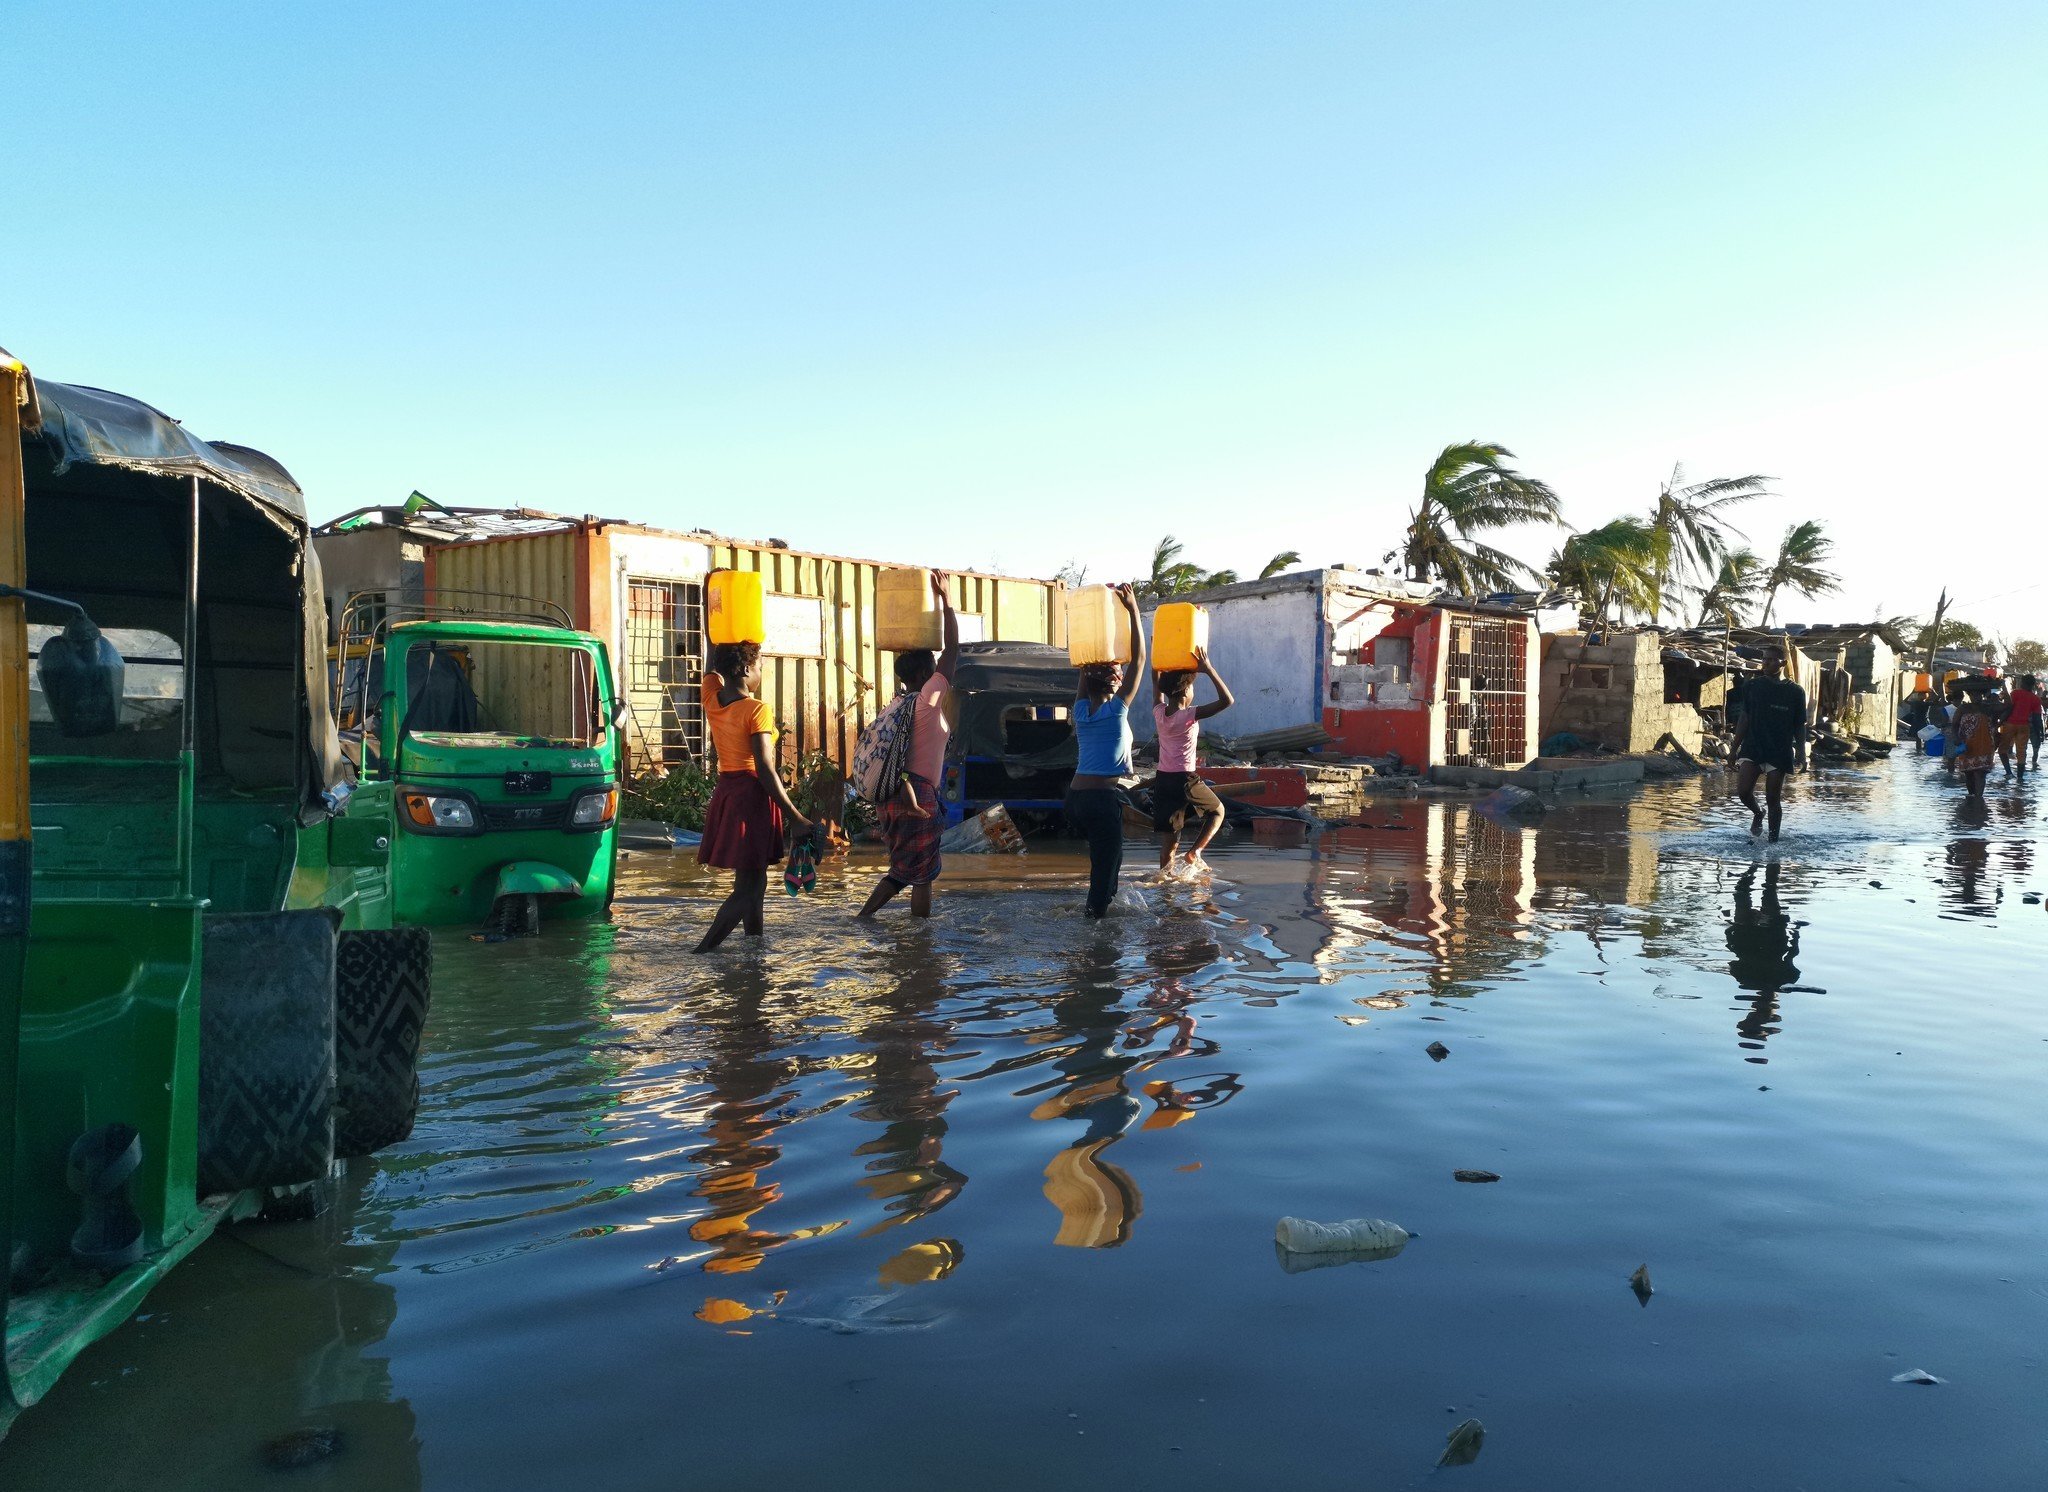 Survivors of Cyclone Idai in Beira, Mozambique, faced water and electricity shortages and were at risk of waterbourne diseases carried in contaminated flood water. (Photo: Sergio Zimba / Oxfam)